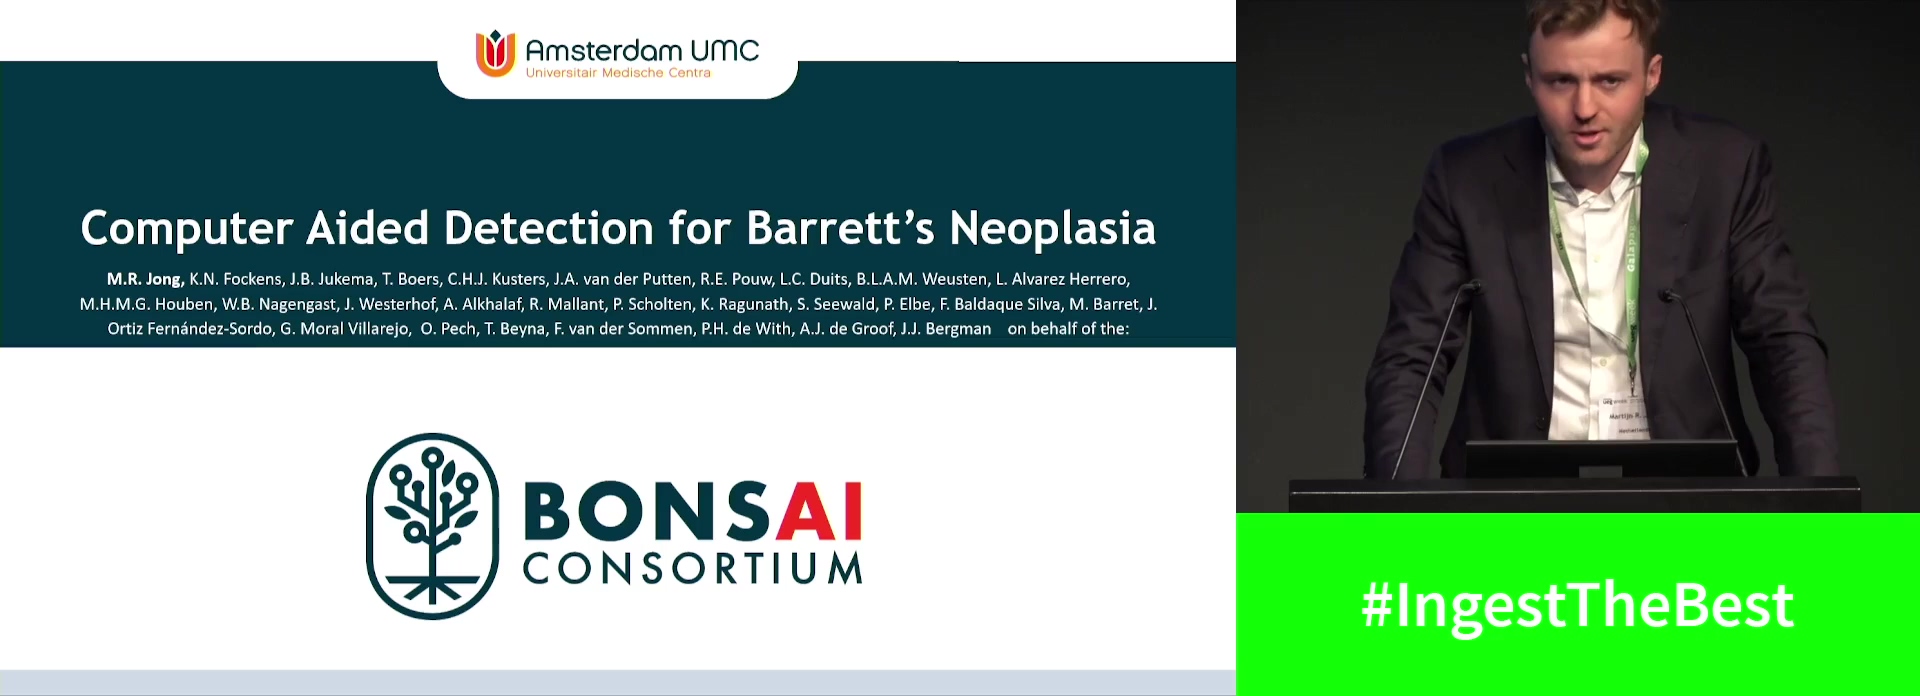 VIDEO-BASED COMPUTER AIDED DETECTION SYSTEM IMPROVES BARRETT’S NEOPLASIA DETECTION OF GENERAL ENDOSCOPISTS IN A TWO-PHASE BENCHMARKING STUDY